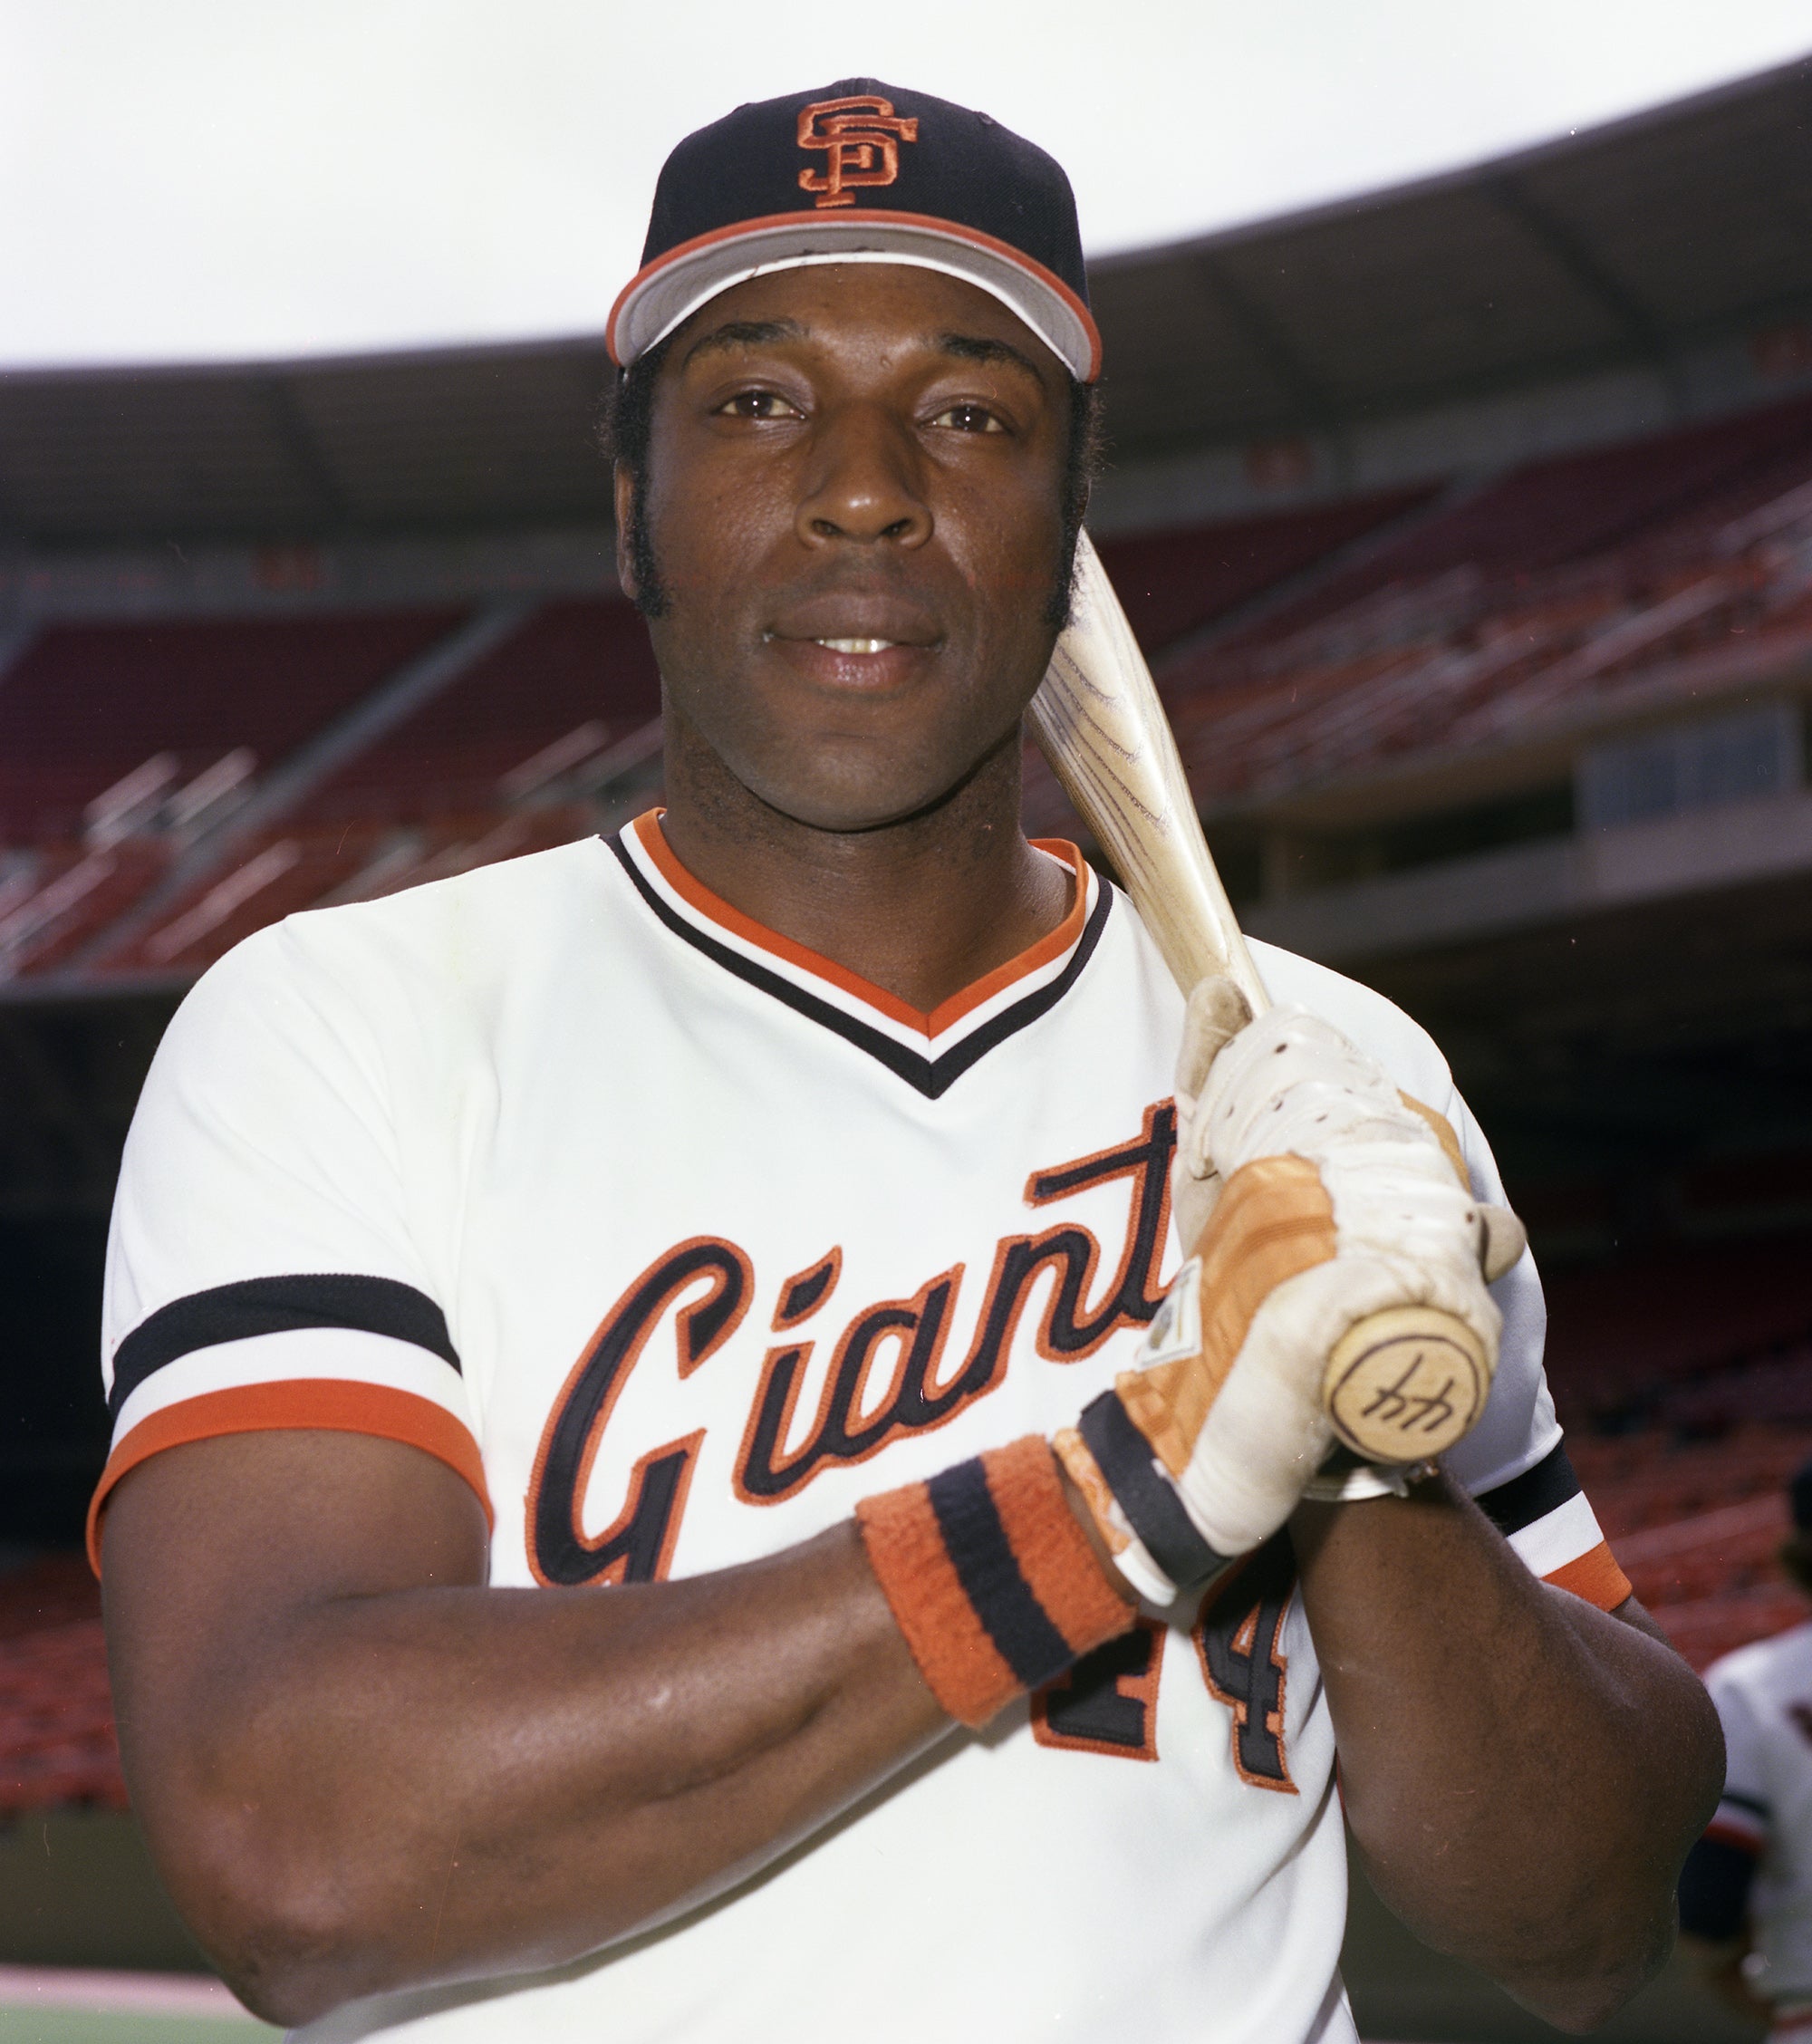 Willie McCovey - San Francisco Giants